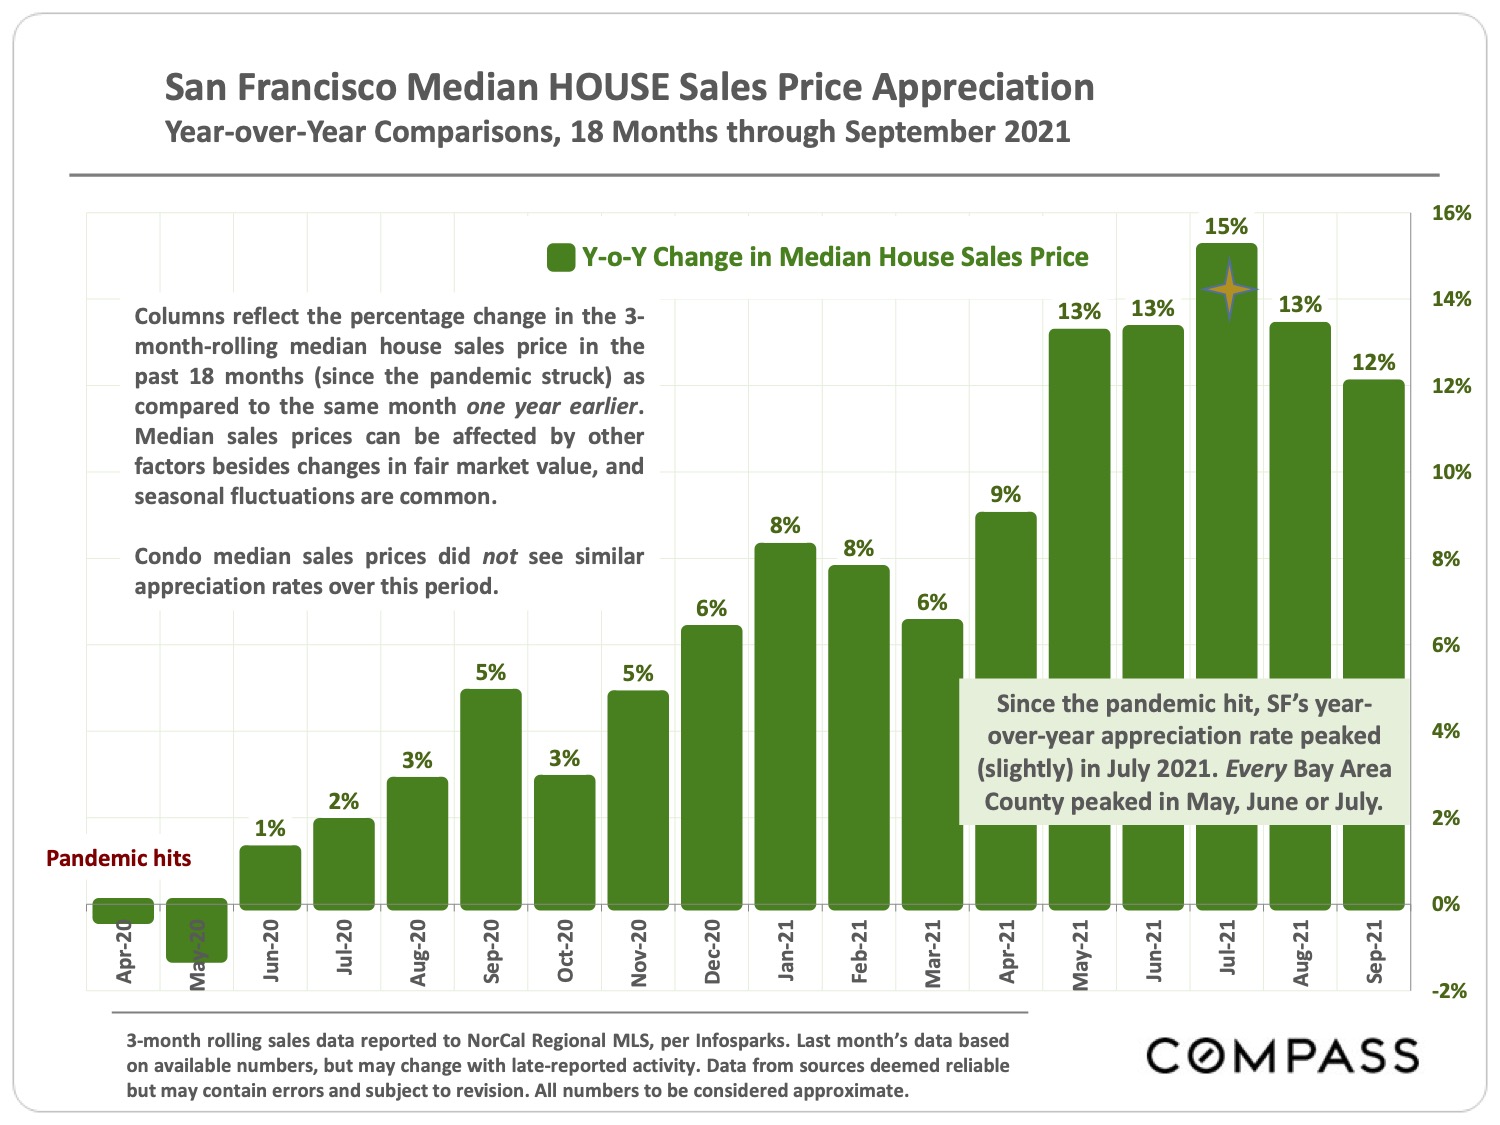 Image showing the San Francisco Median Houses Sales Price Appreciation Year over Year Comparisons 18 Months through September 2021